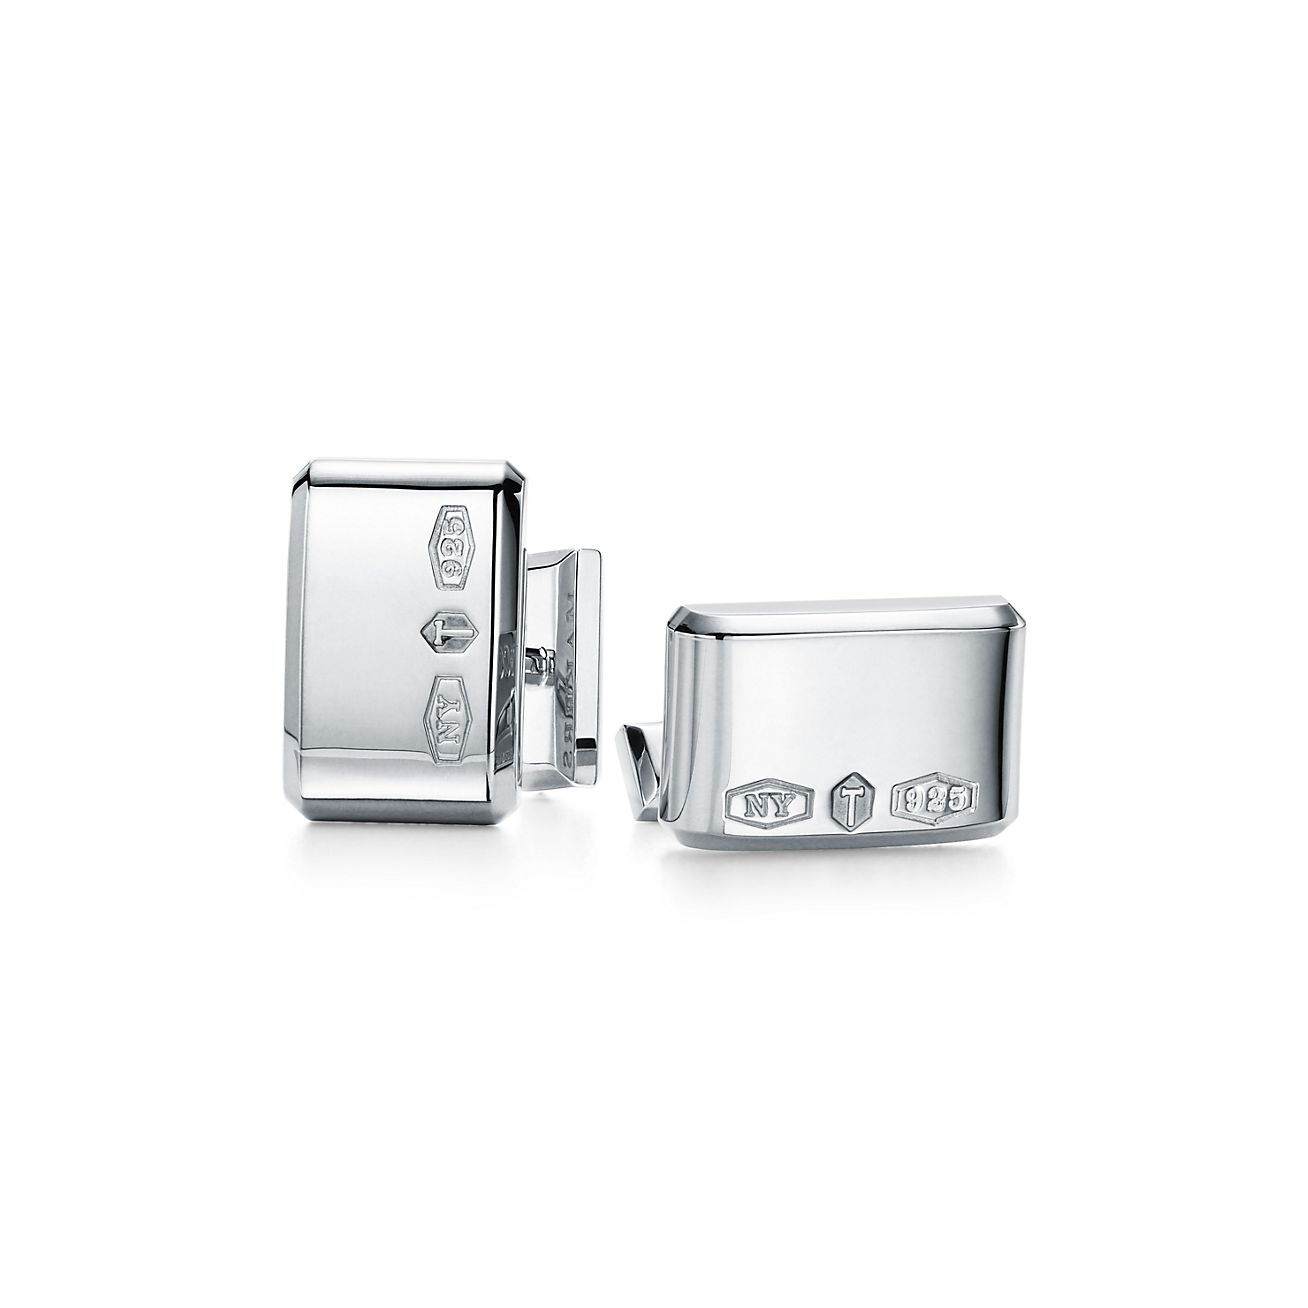 Makers rectangle cufflinks in sterling 